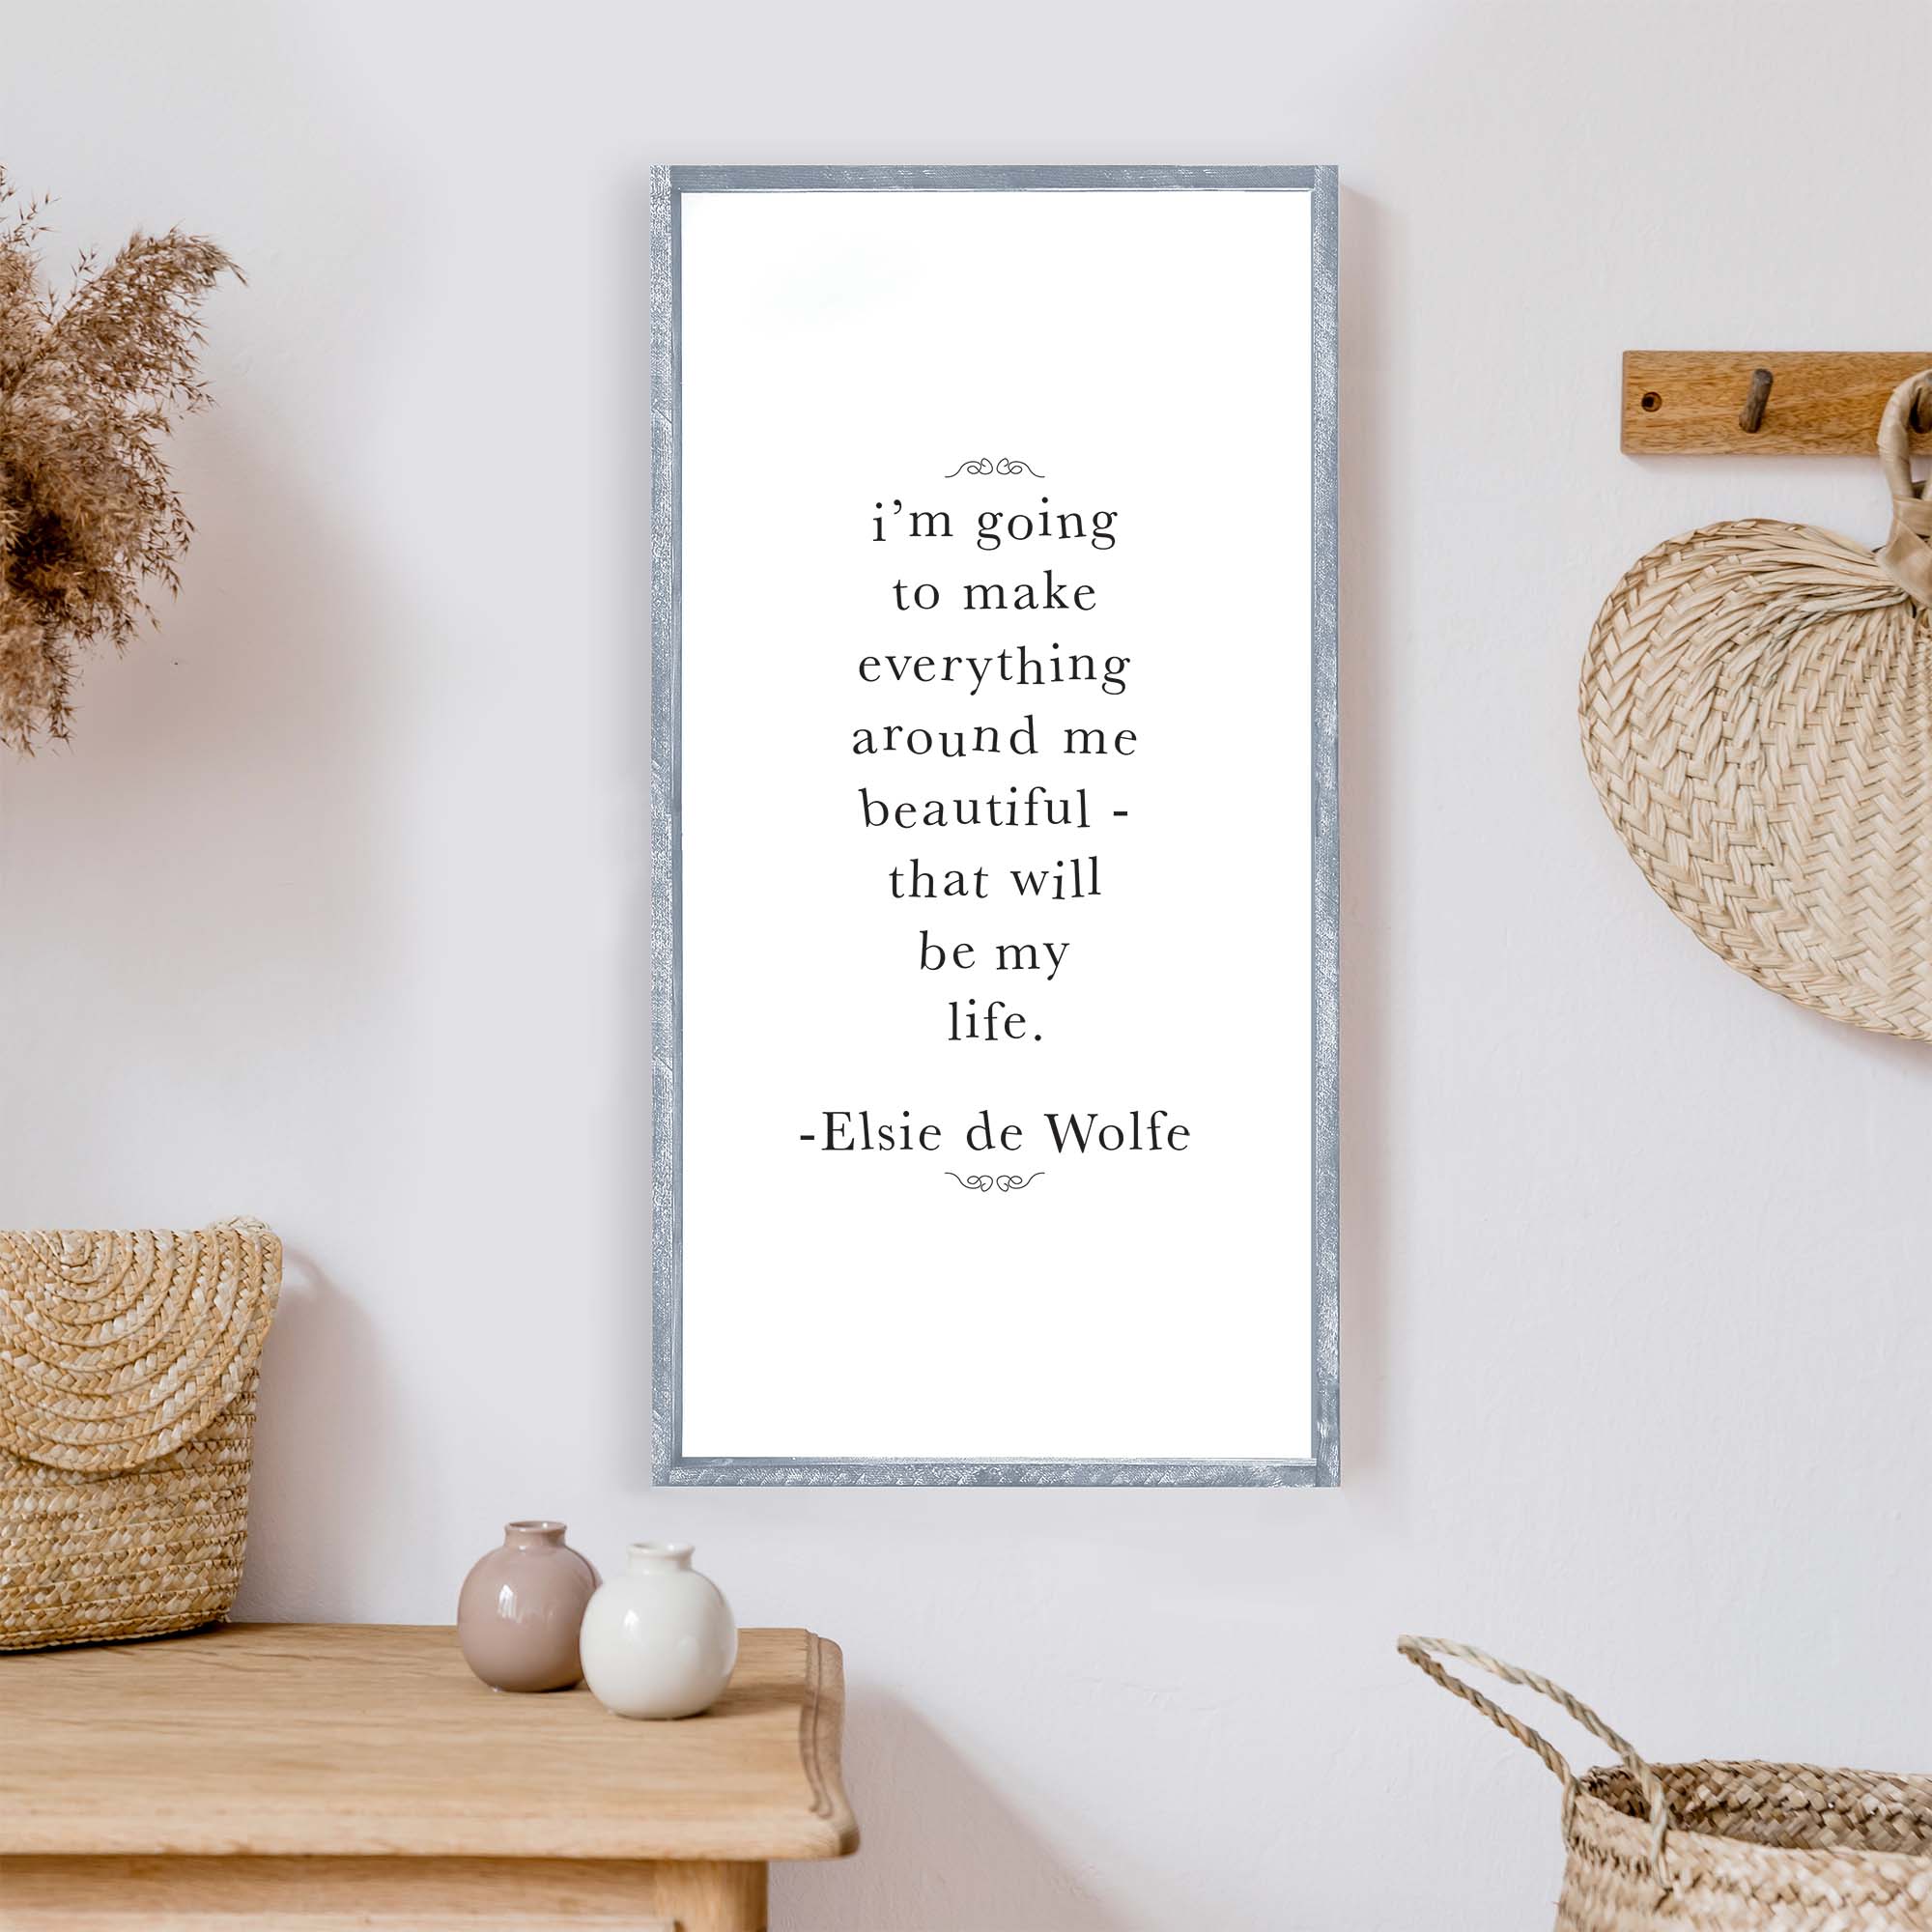 elsie de wolfe quote wood sign hoekstra decor im going to make everything around me beautiful wholesale wood signs